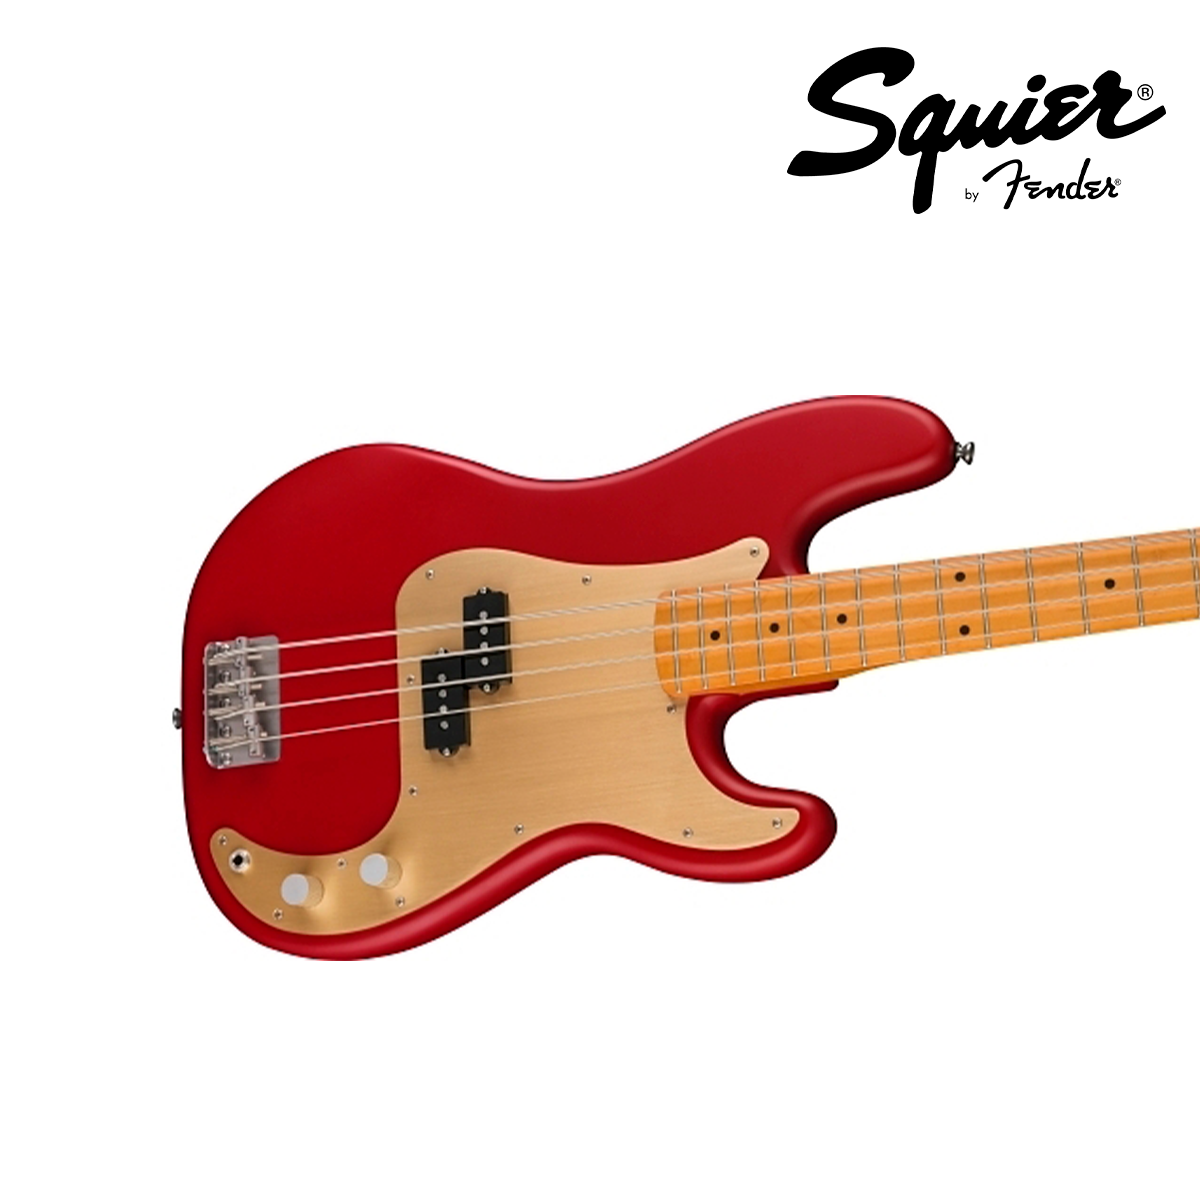 BAJO ELECTRICO SQ 40 P BASS MN AHW GPG SDKR